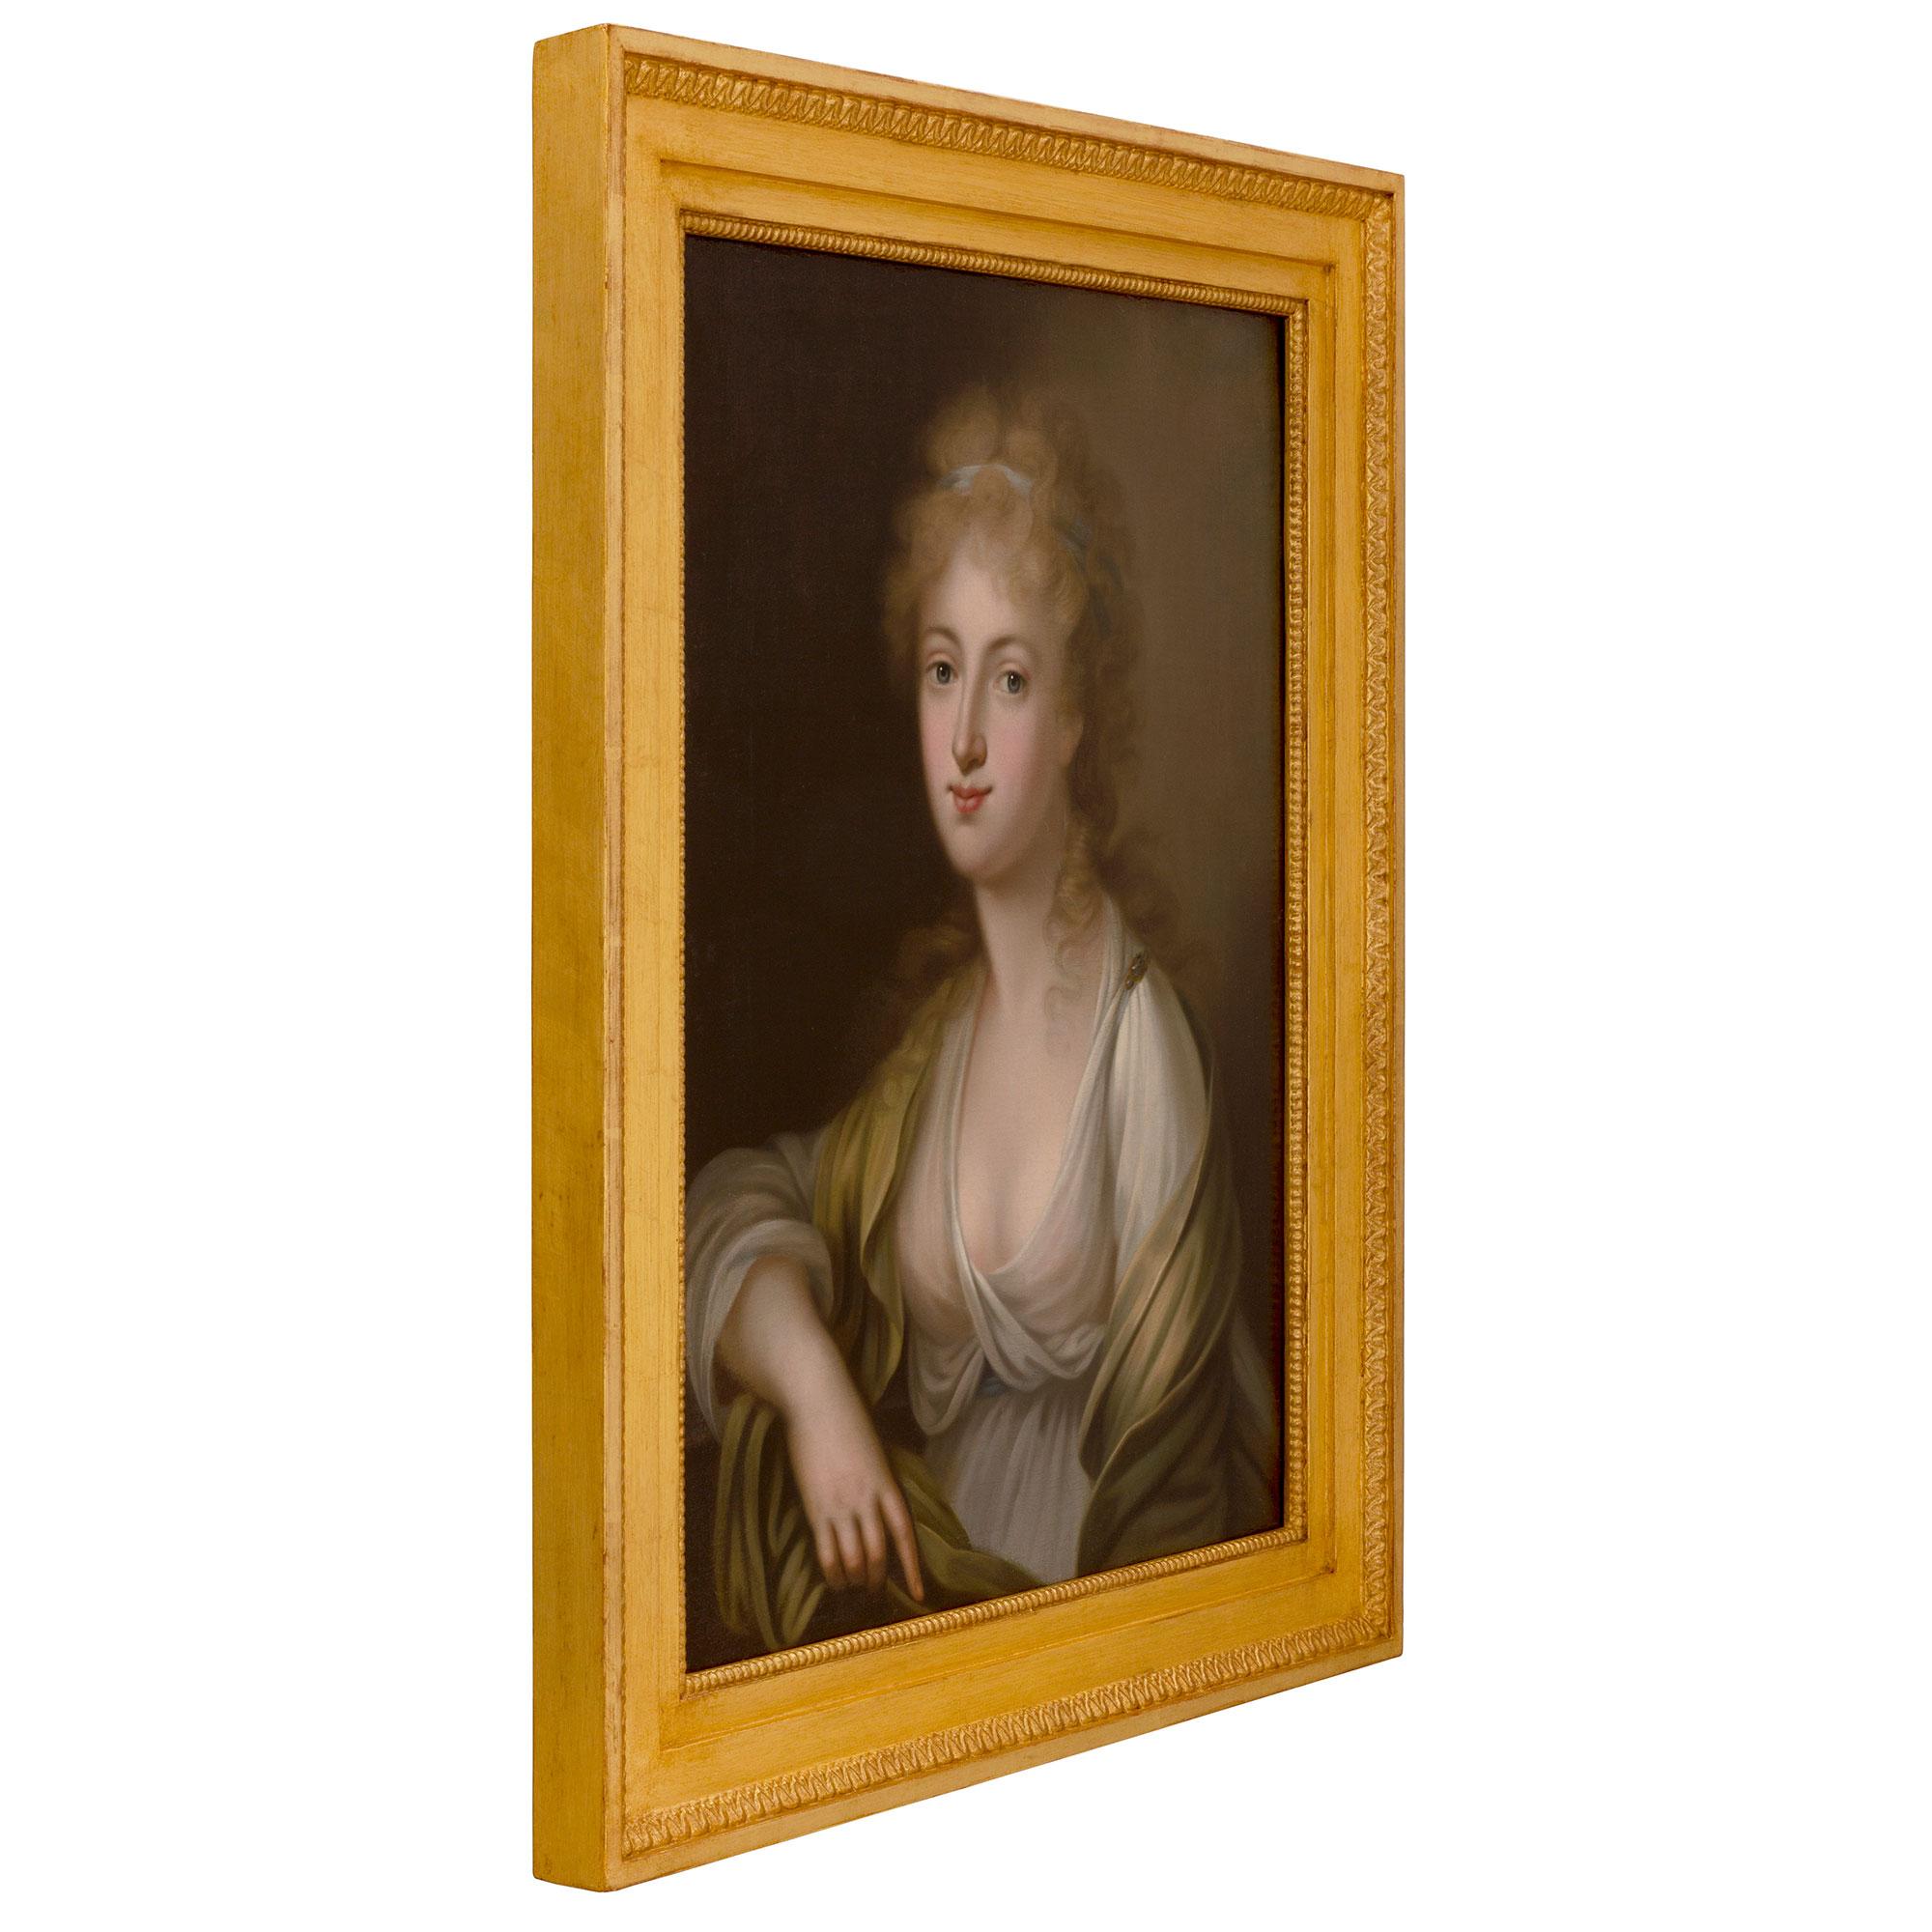 A charming Continental 19th century oil on canvas painting of a young maiden. The wonderfully executed painting is set within a charming giltwood frame with a fine mottled design and an elegant foliate and beaded band. At the center is a beautiful